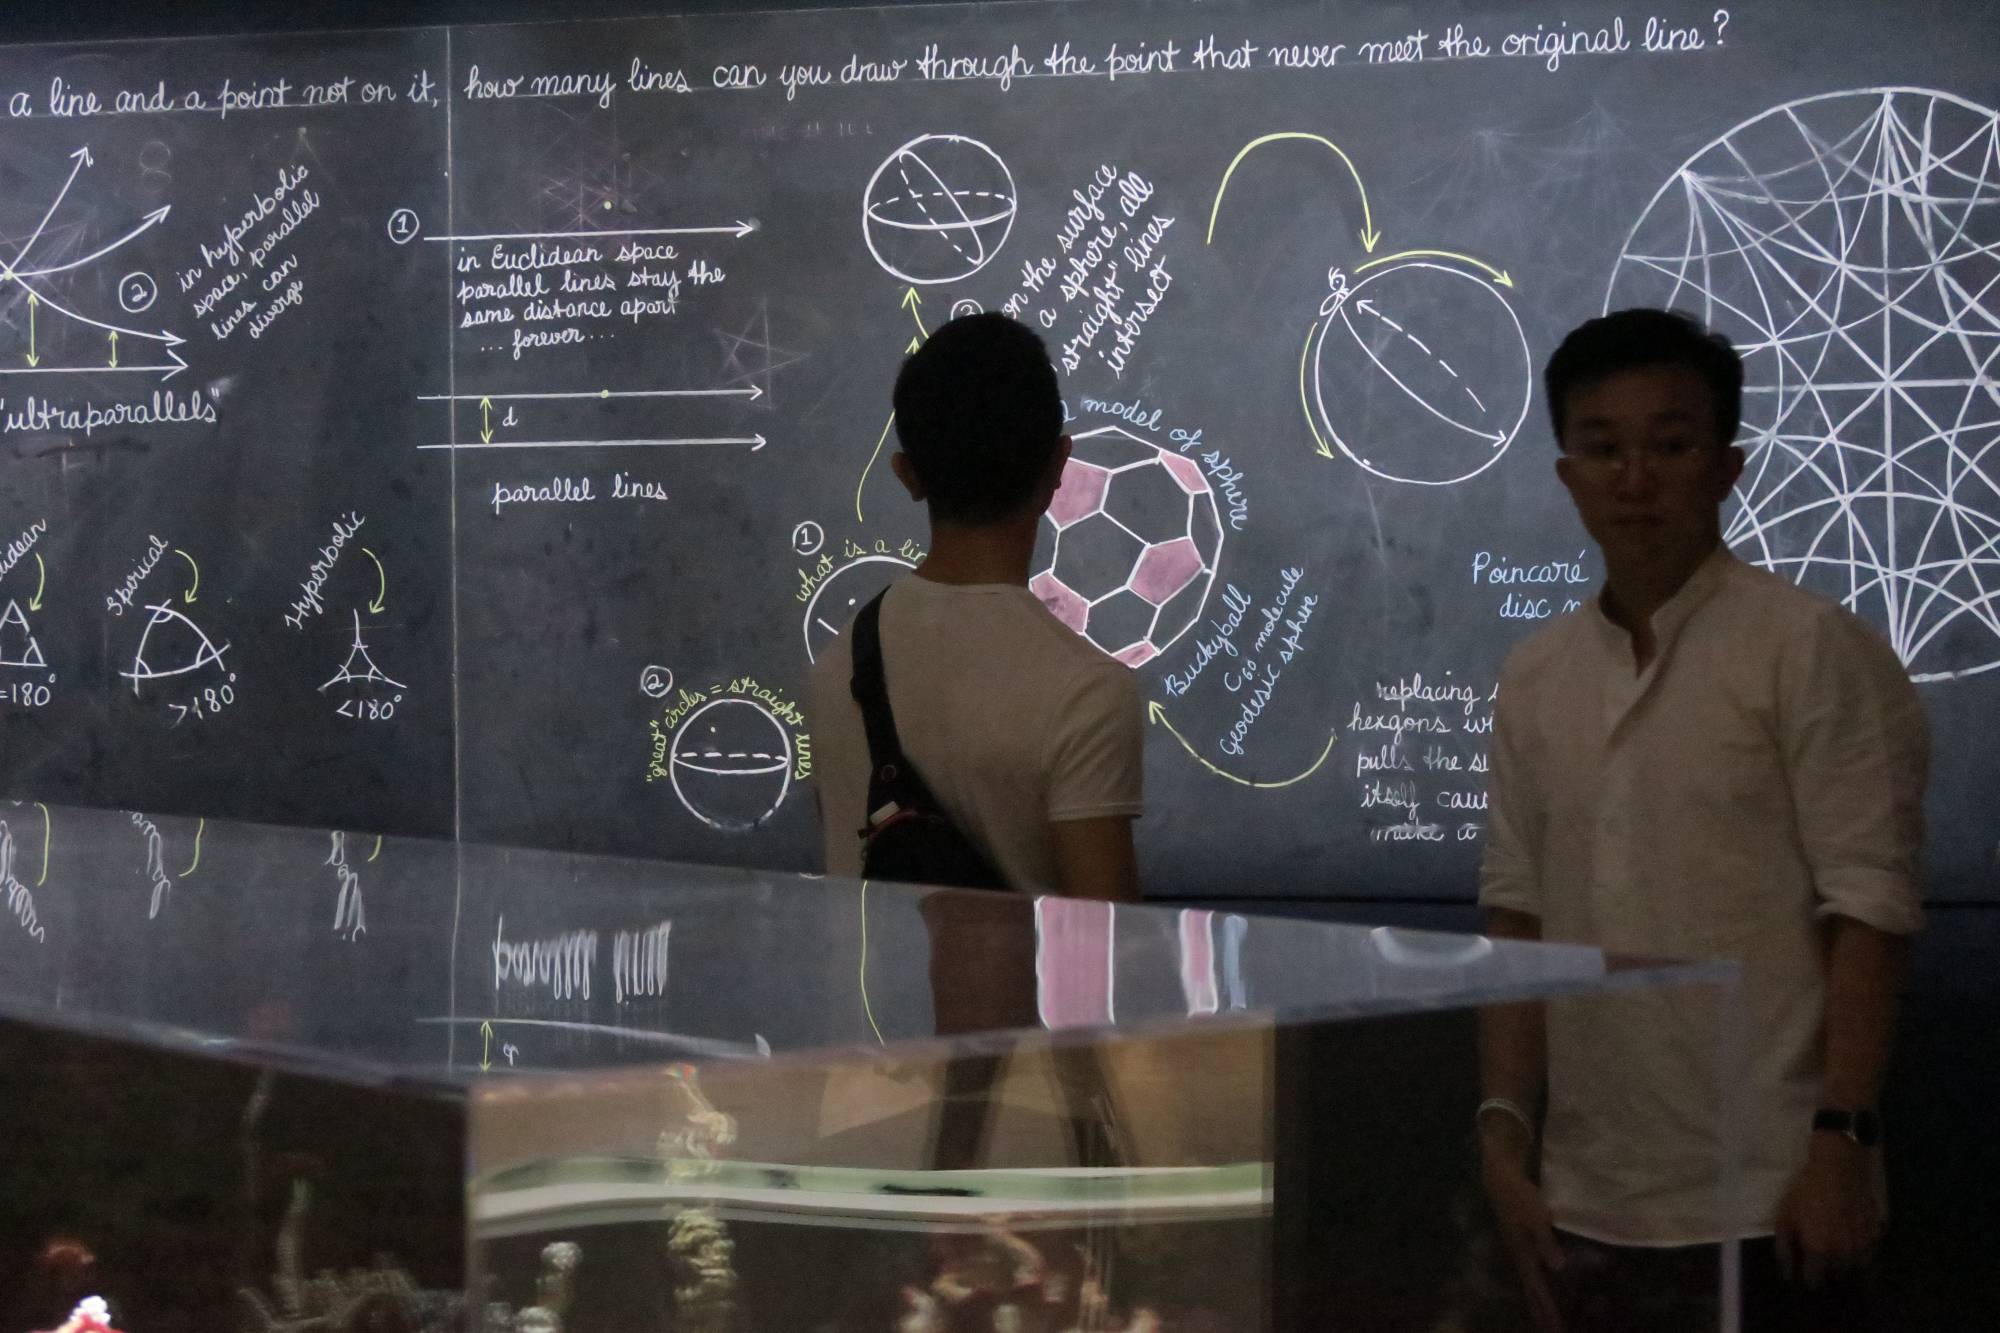 Two figures in front of a blackboard with scientific drawings